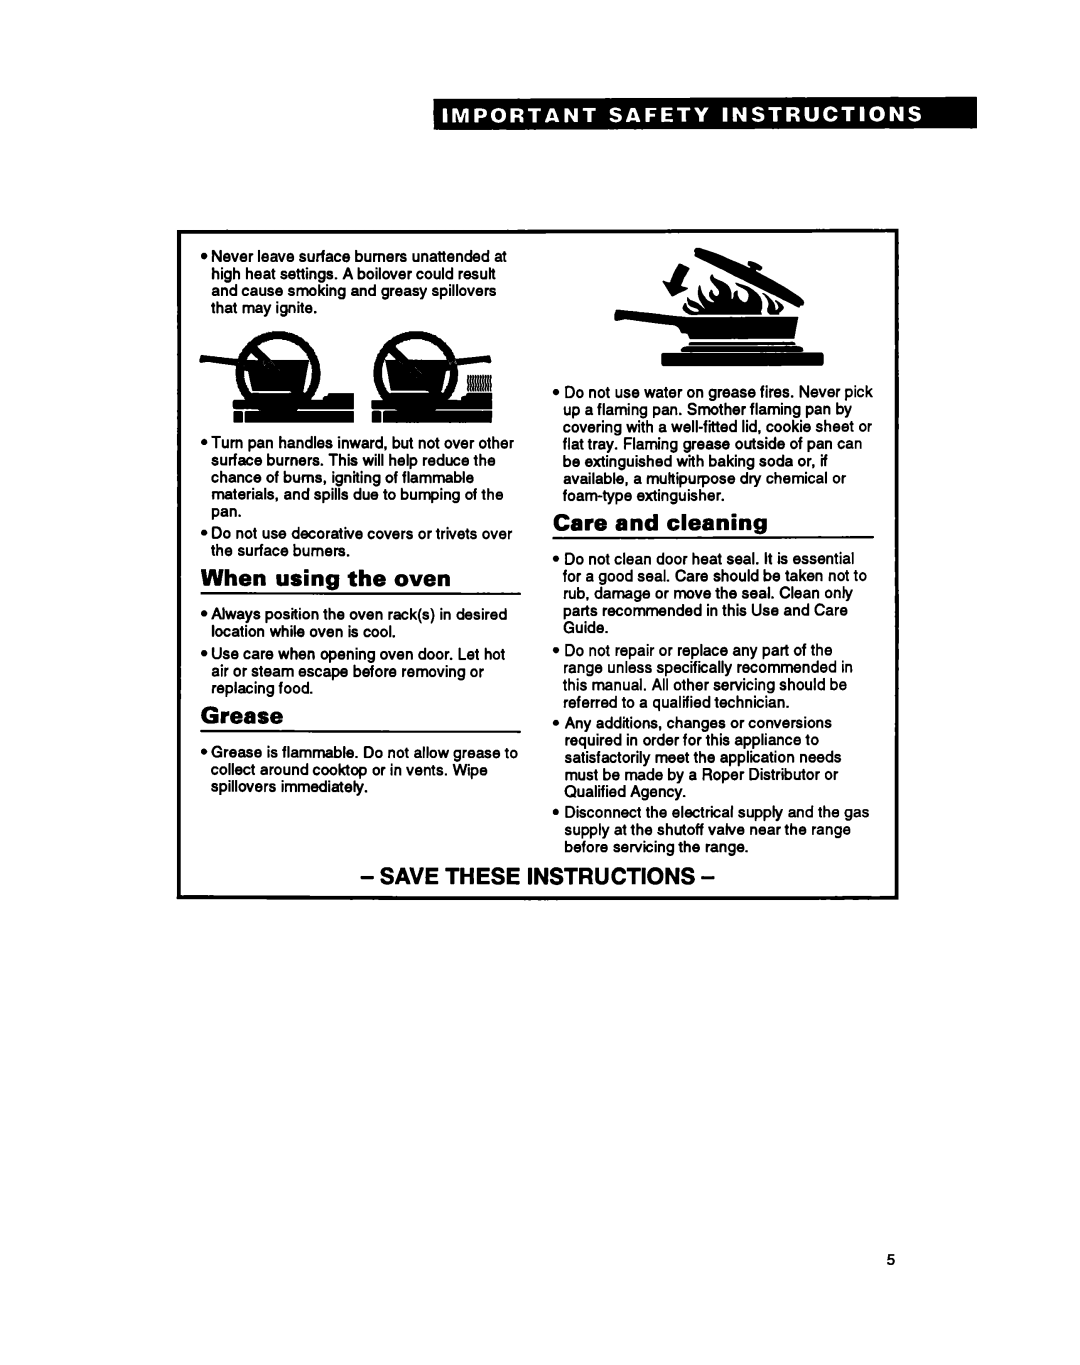 Whirlpool FGP357Y warranty When using the oven, Grease, Care and cleaning, Save These Instructions 